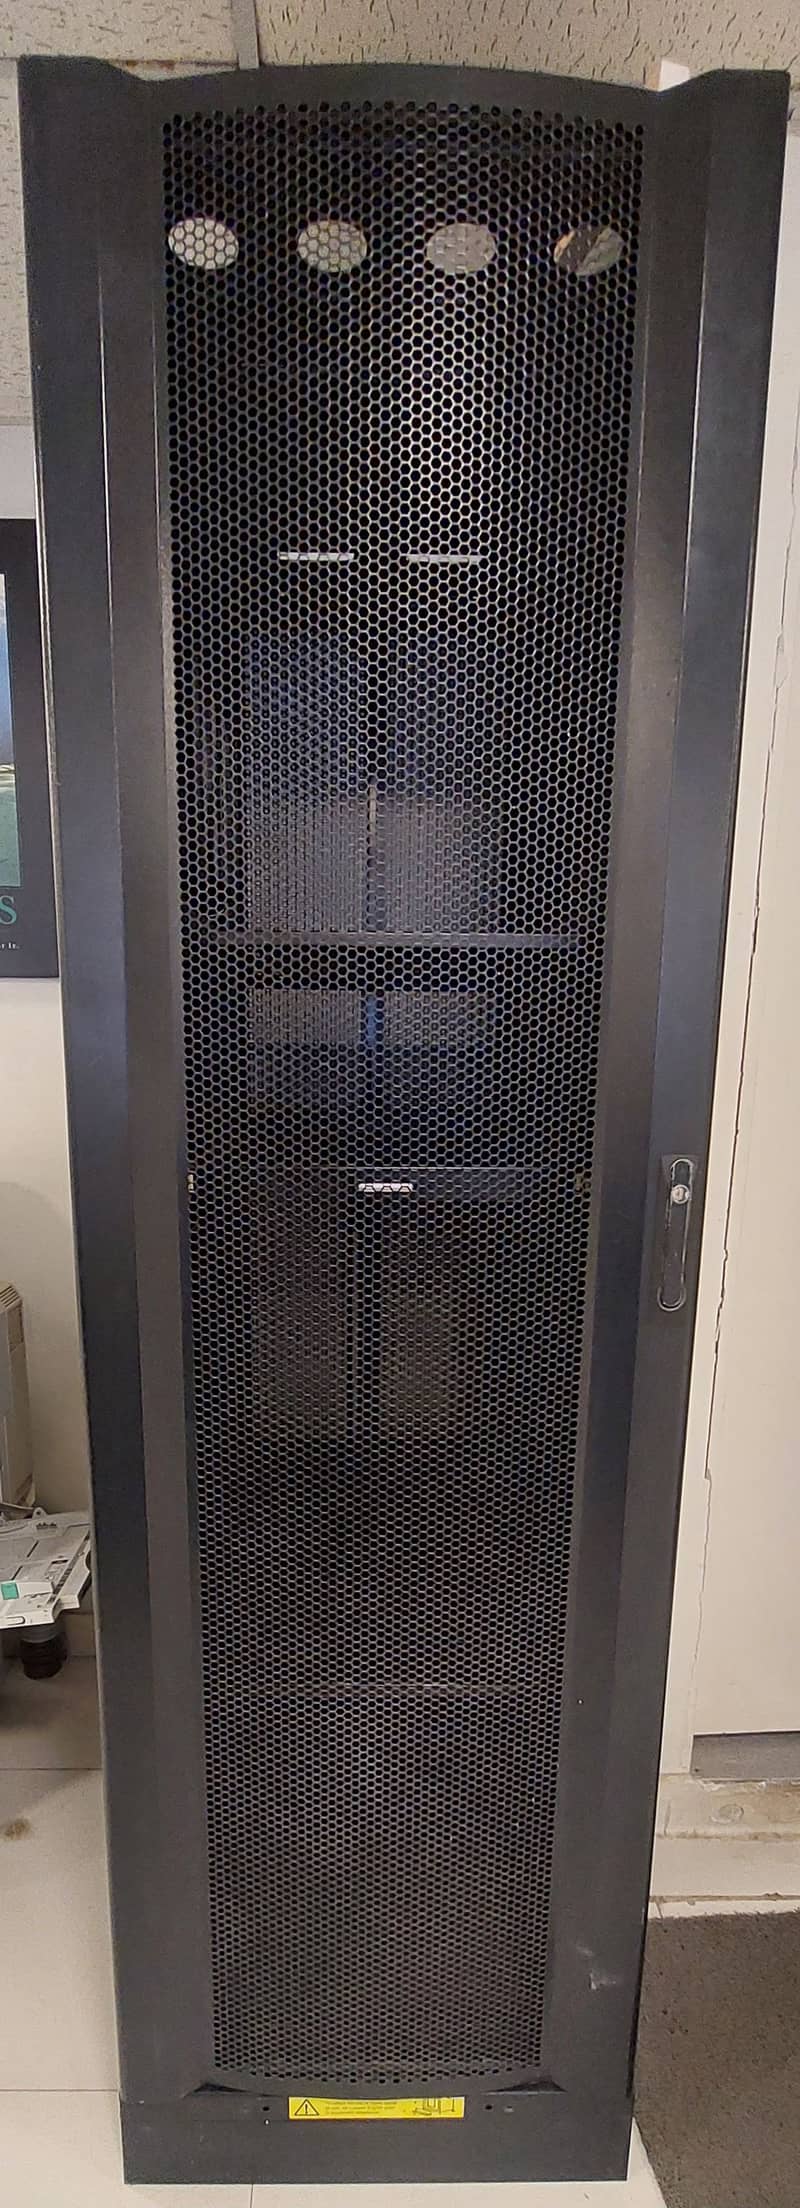 NETWORK AND SERVER RACK 0